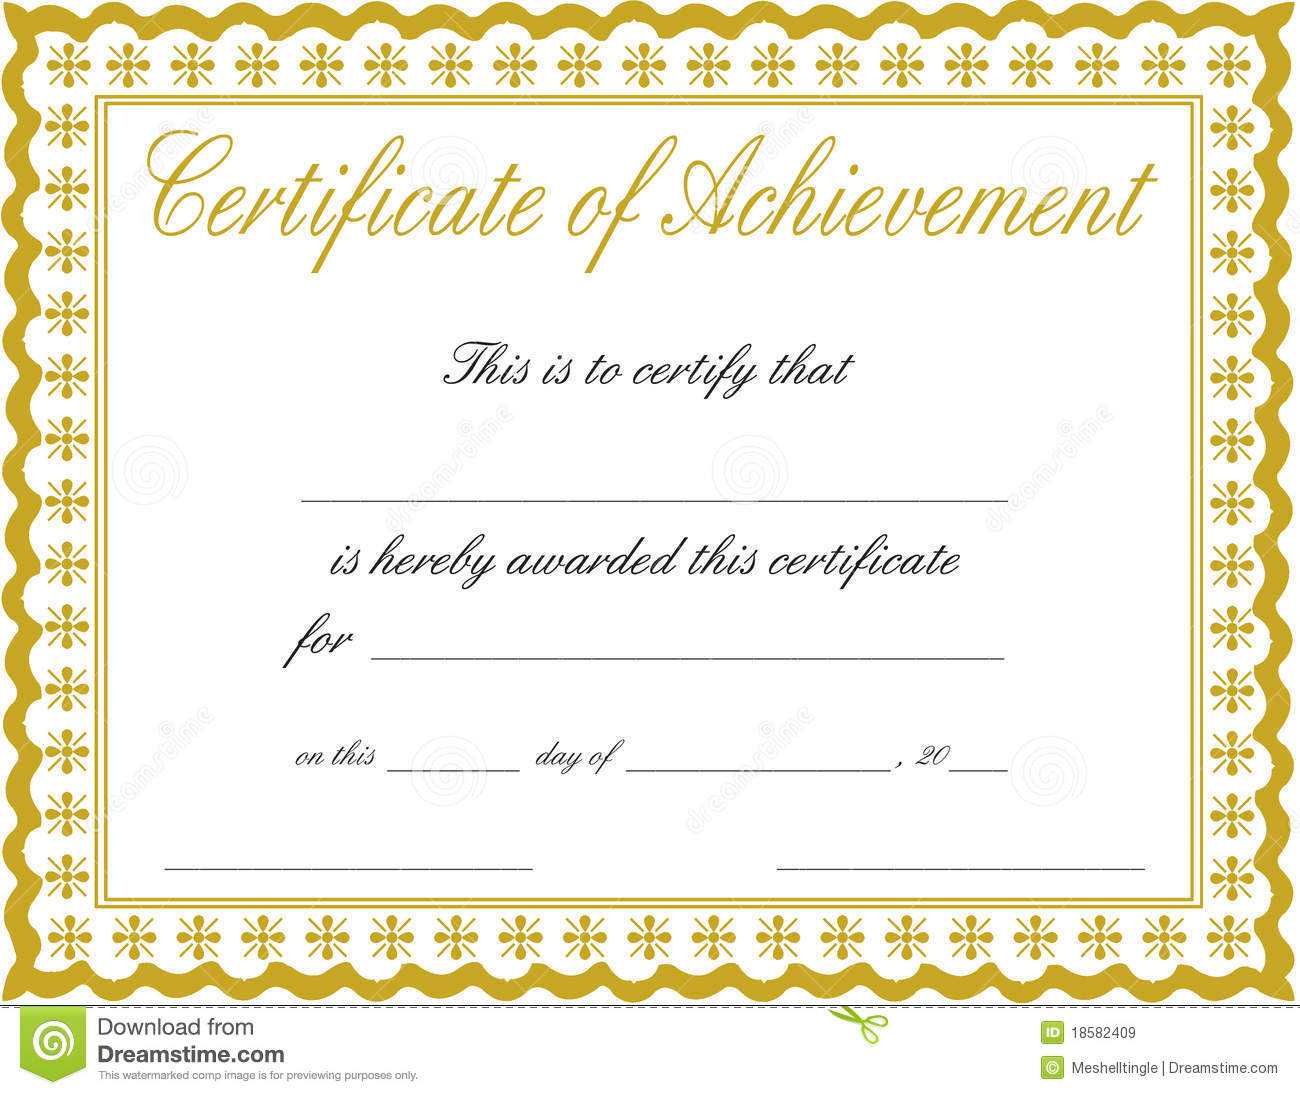 Free Printable Certificate Of Achievement Template | Mult Within Blank Certificate Of Achievement Template